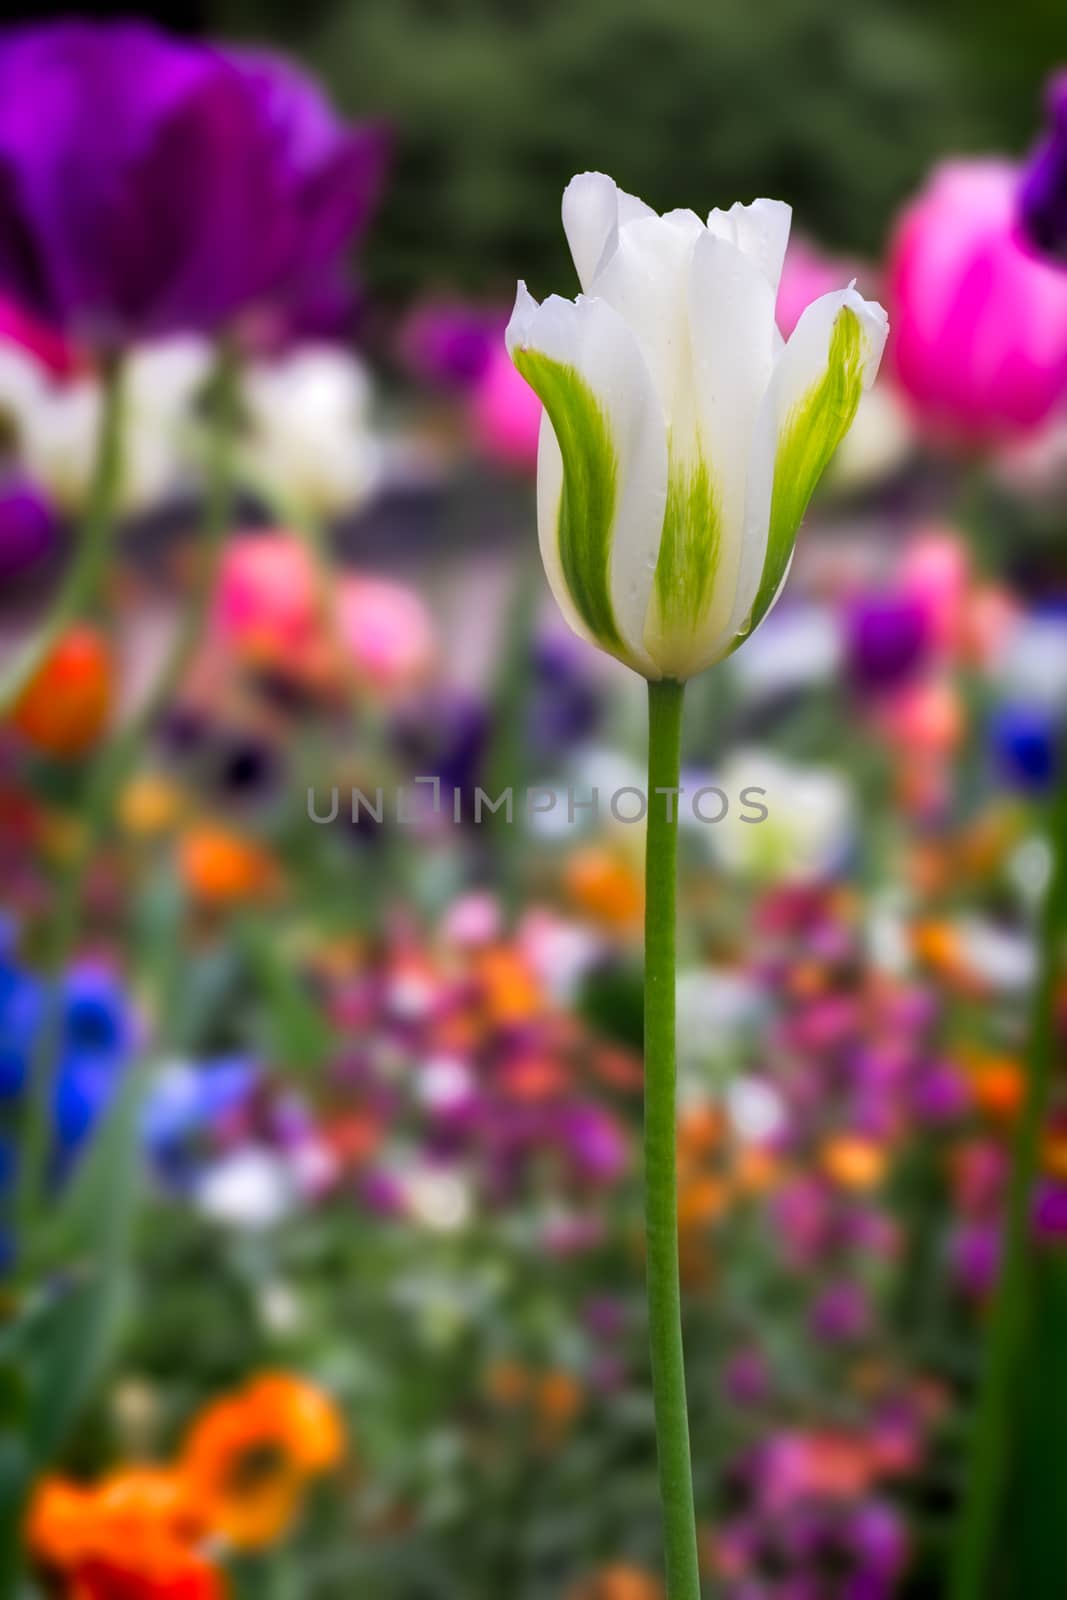 Colorful spring flower with tulip (lat. Tulipa) by fisfra